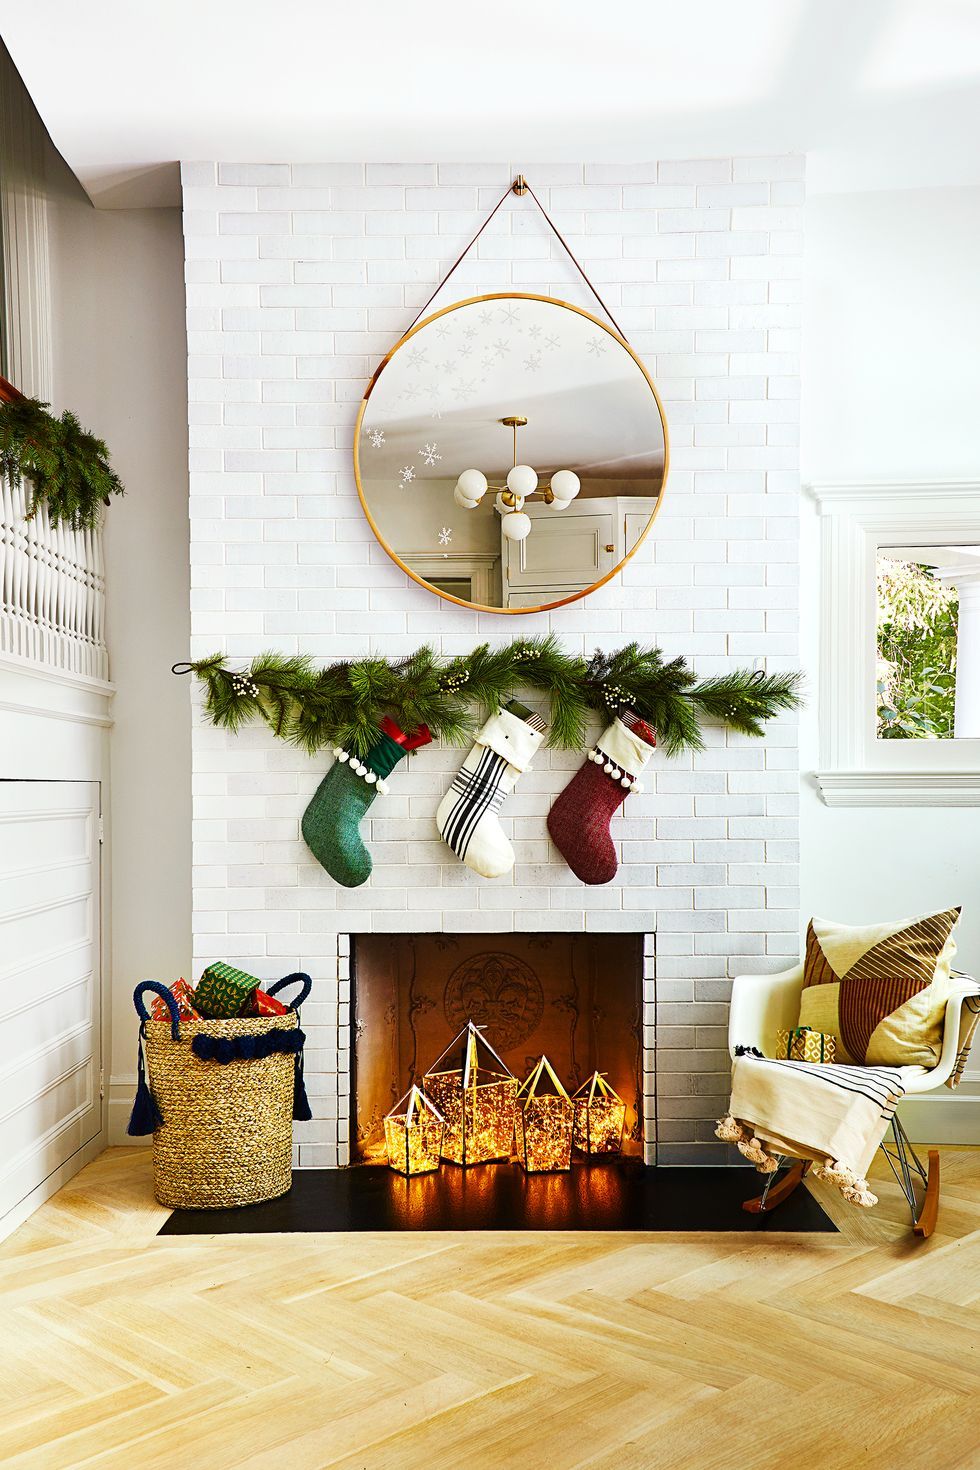 Cozy Christmas spaces in your home